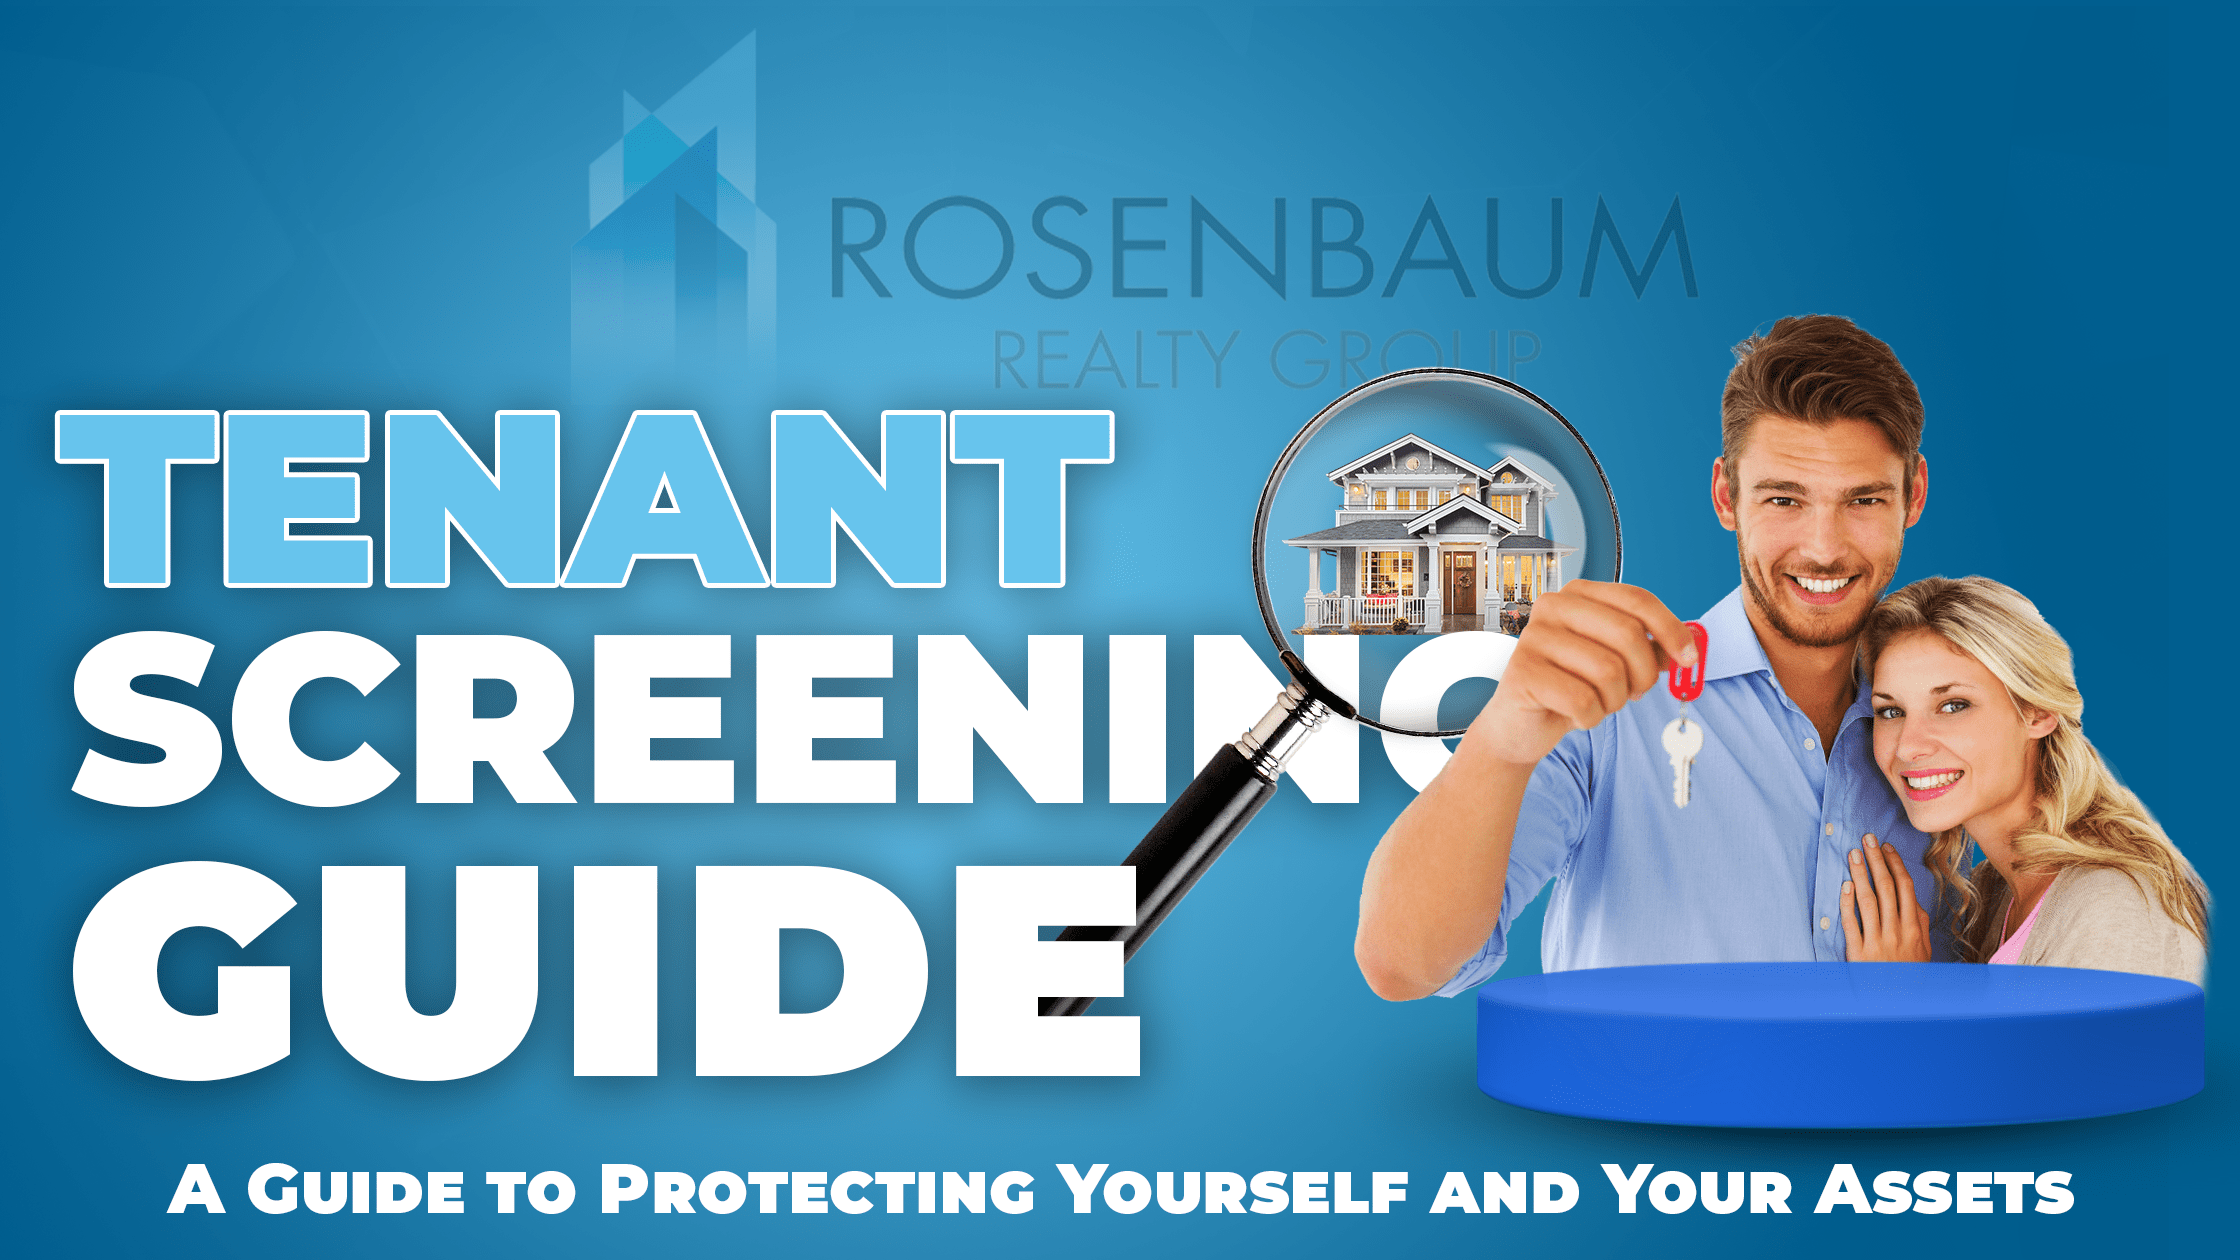 How to Screen Tenants for Your Rental Property: A Guide to Protecting Yourself and Your Assets